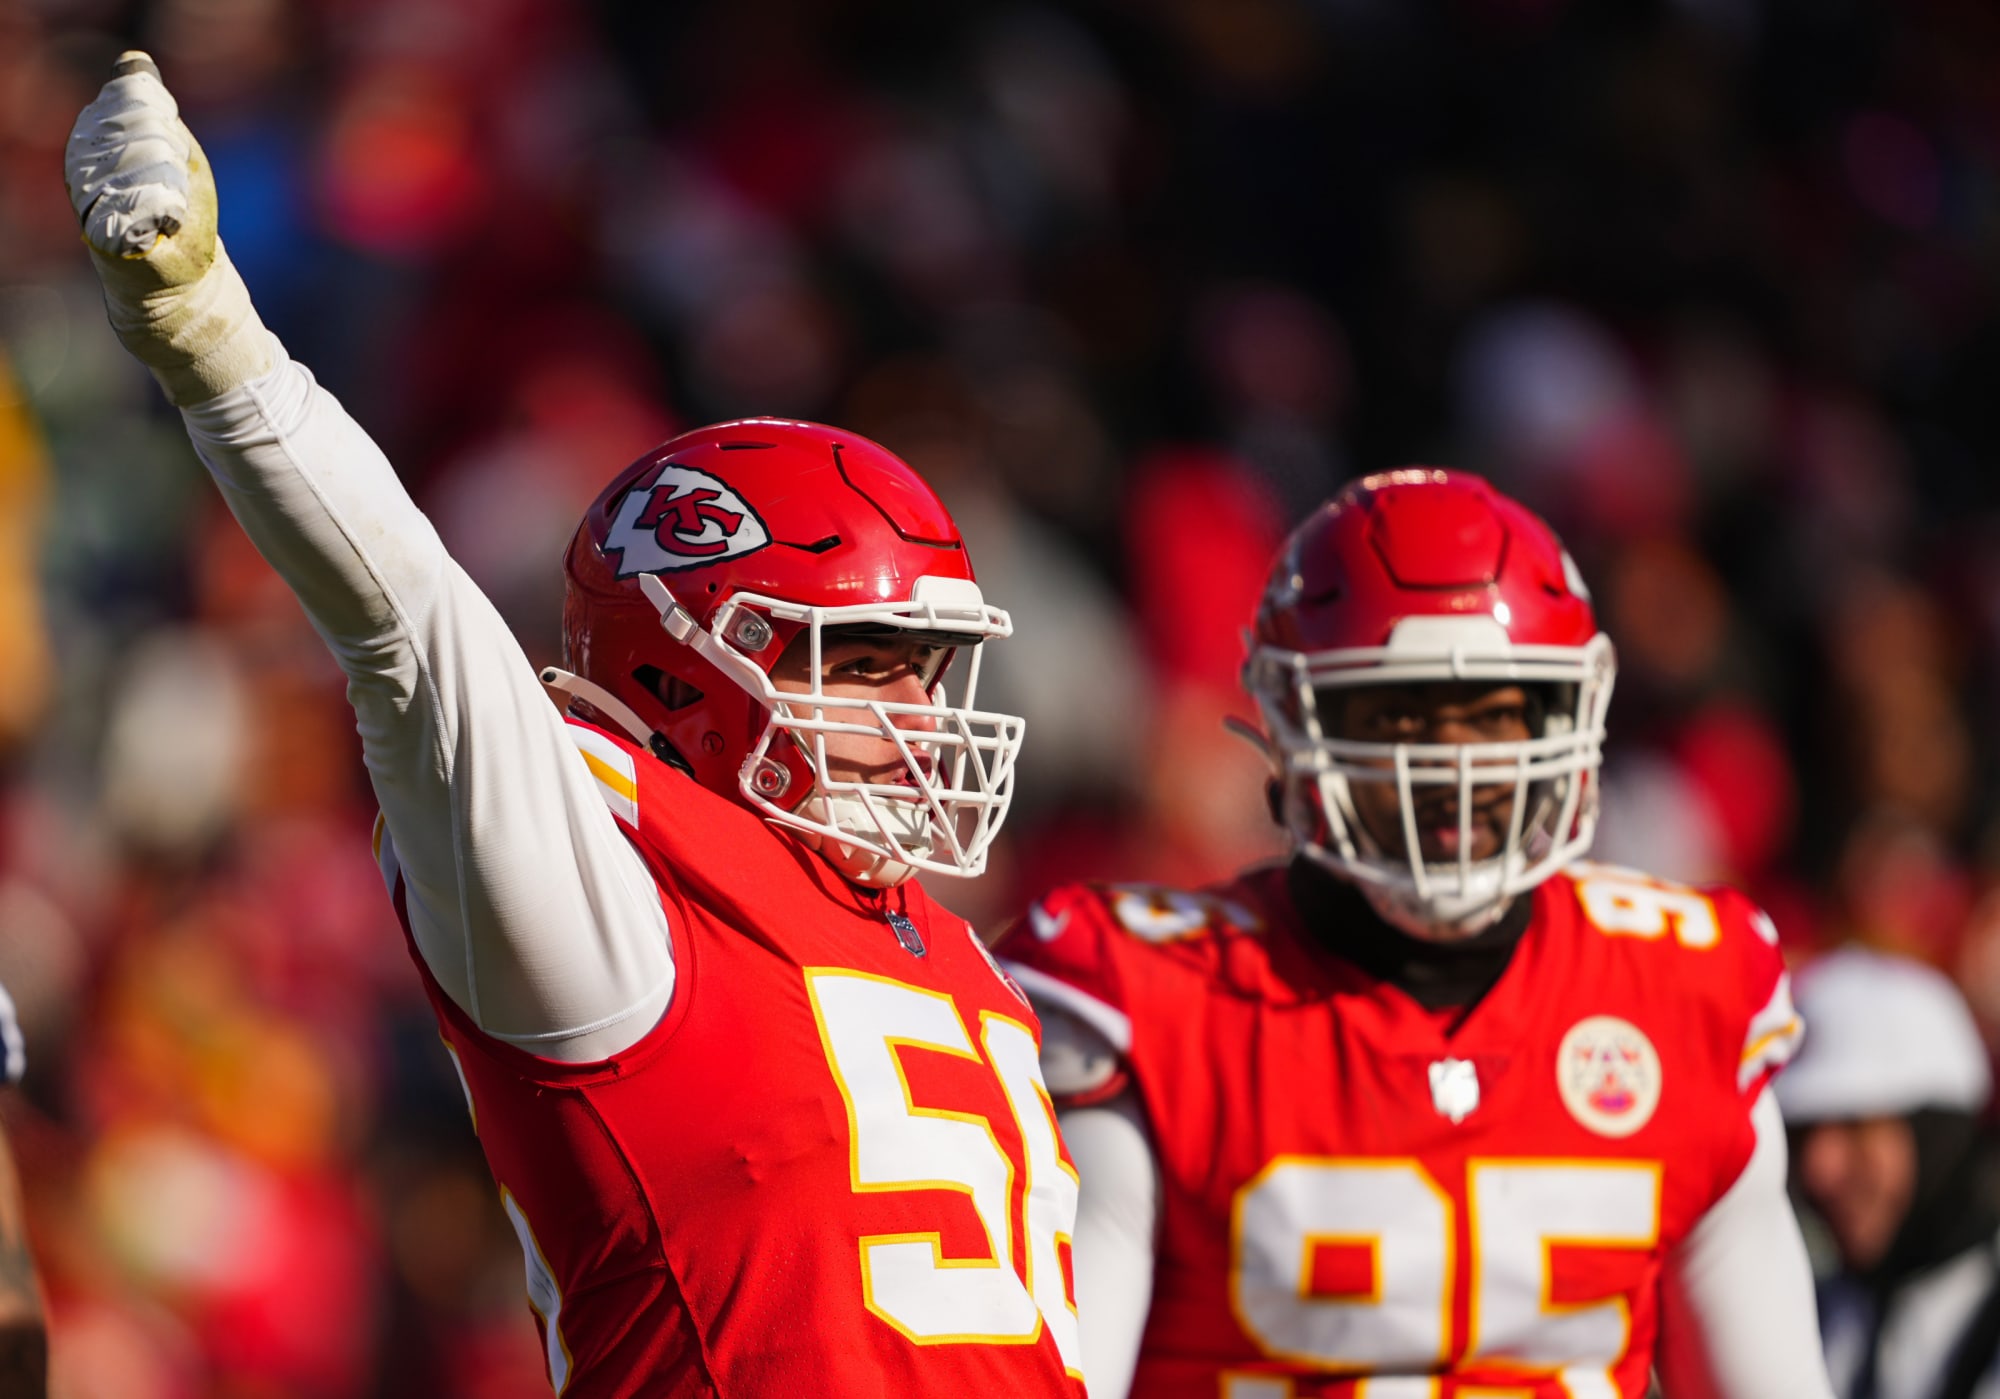 KC Chiefs handle business and snag 12th win against Seahawks